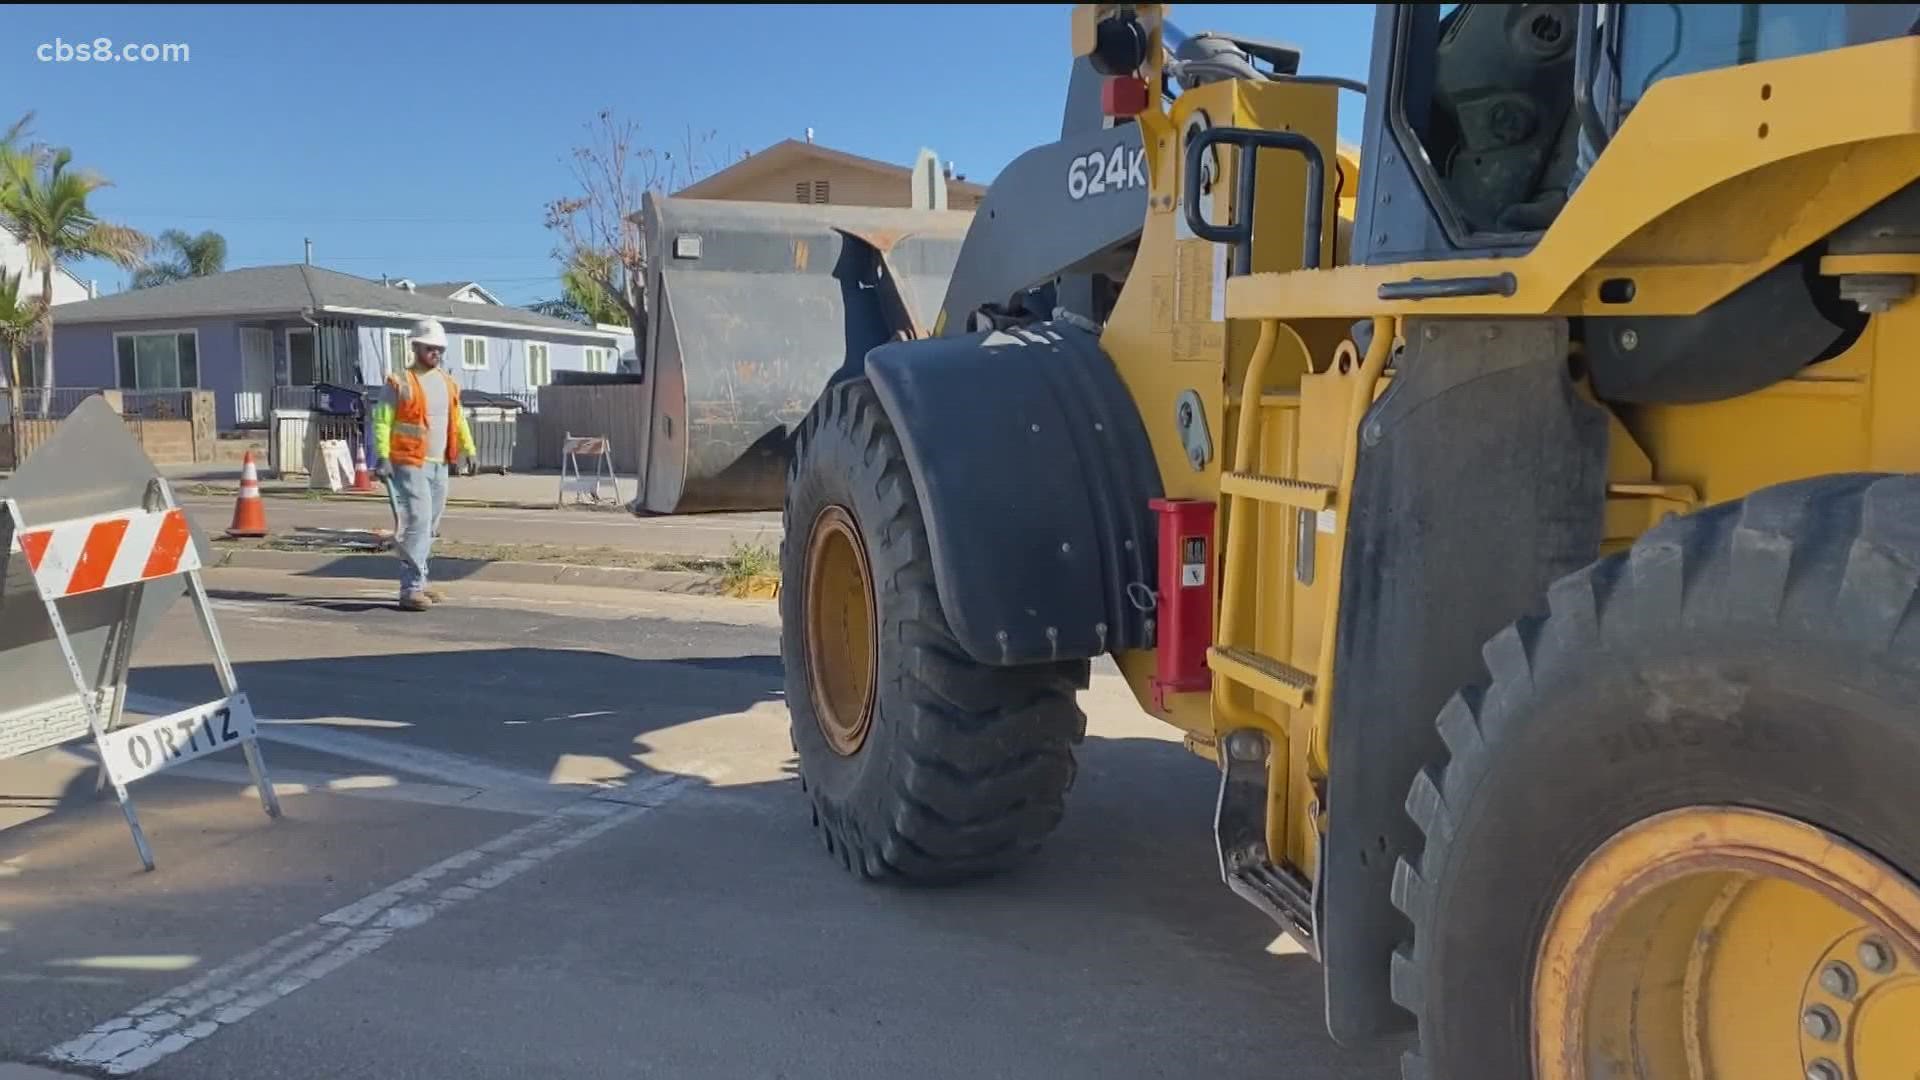 In the next 6 to 18 months, Mayor Todd Gloria said there are plans to repave roughly 54 miles of the San Diego city roads.